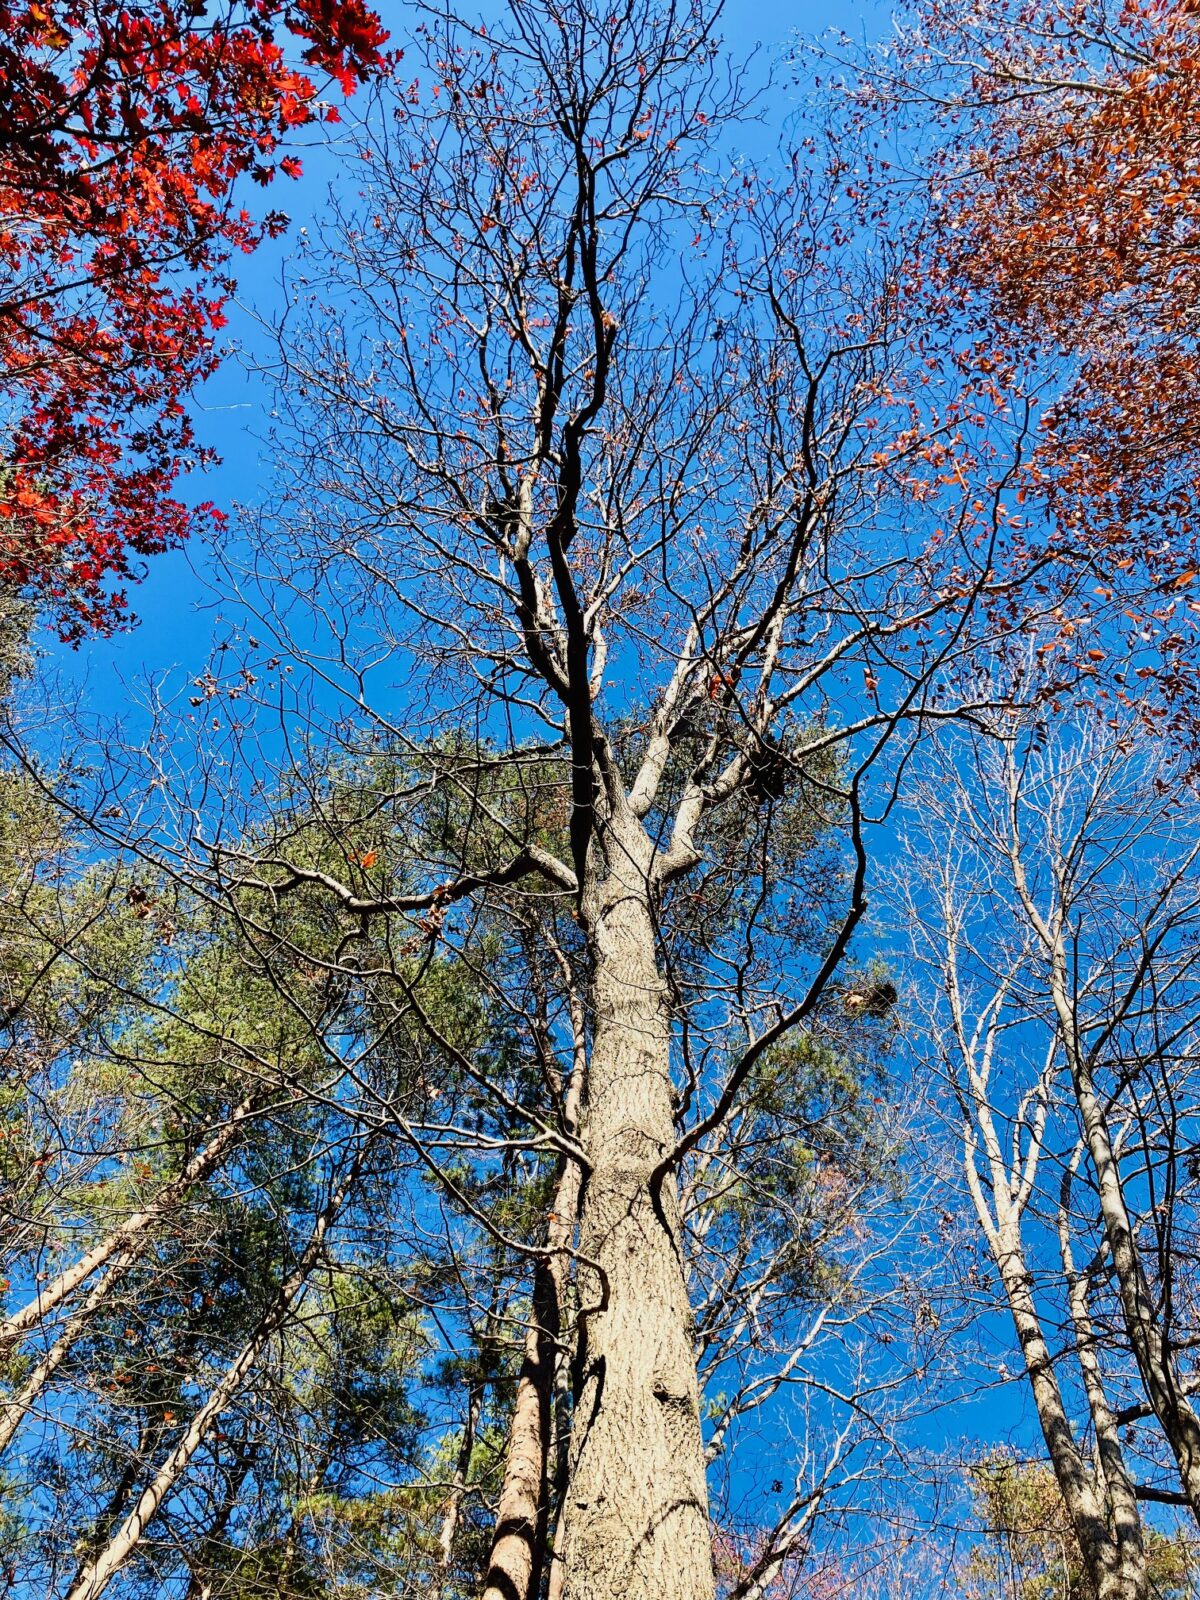 looking up at a tree that has lost its leaves in November. Near it are pines and an oak tree still holding onto its leaves for now